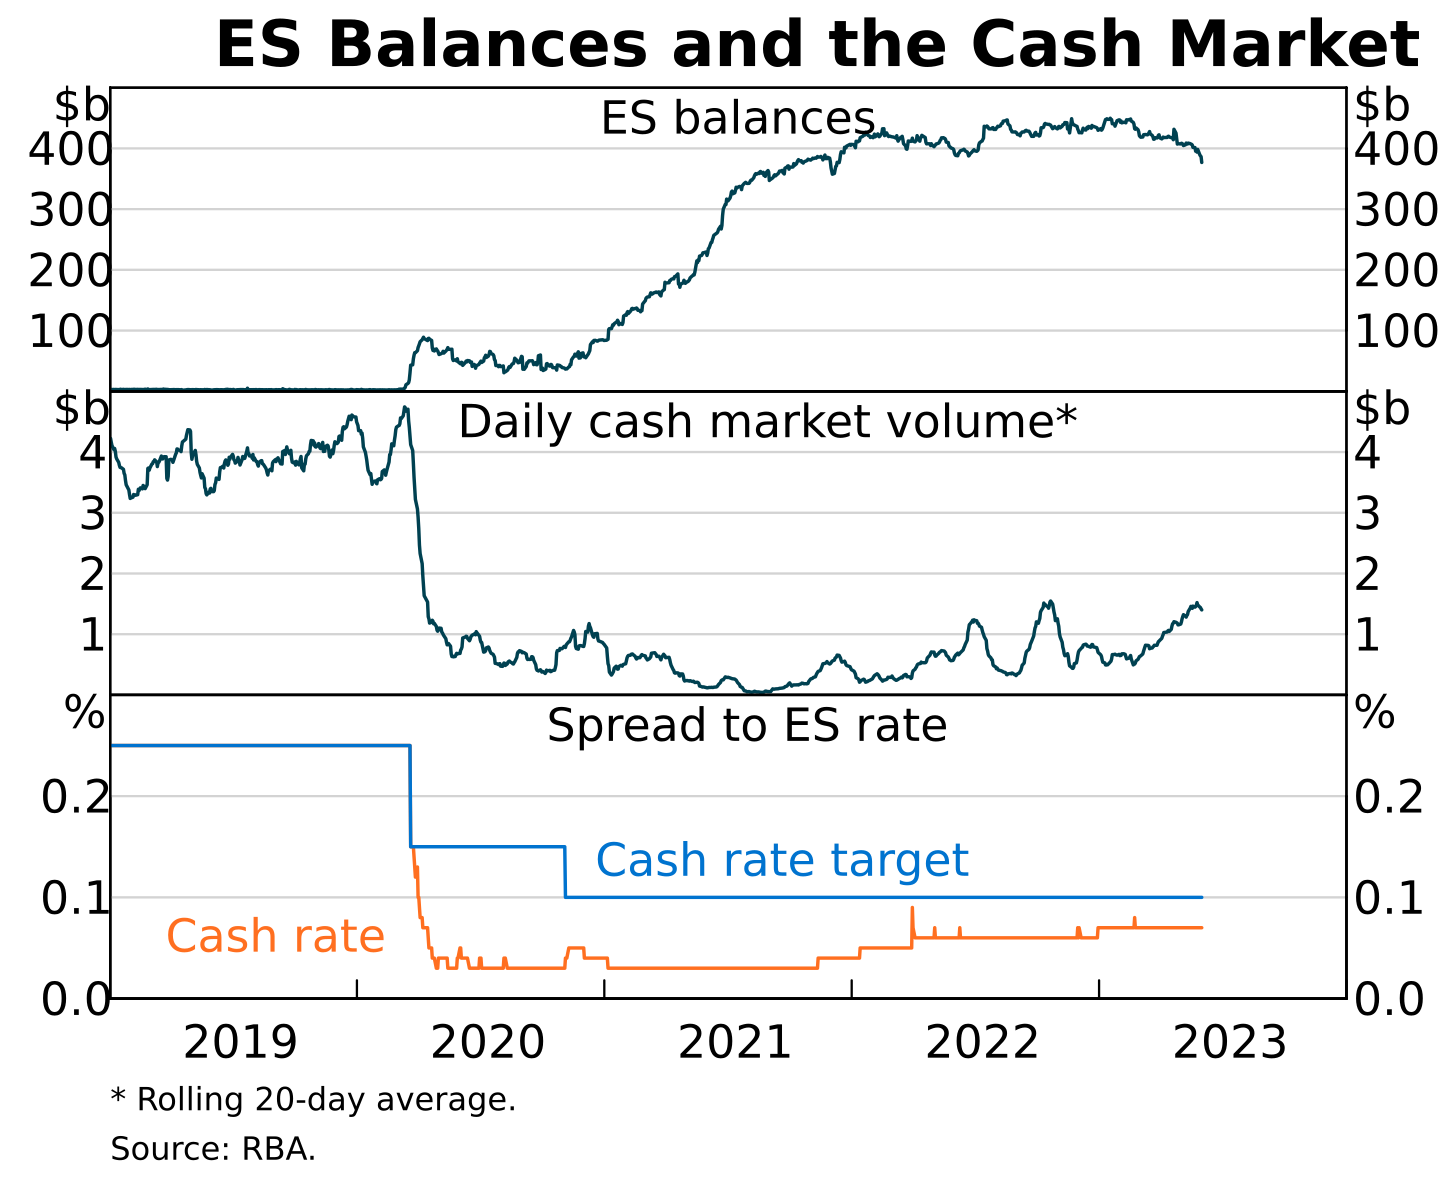 Graph 01: A three panel chart. The first panel shows aggregate surplus ES balances, the second panel shows daily cash market volumes, the third panel shows the cash rate target and published cash rate as a spread to the ES rate. The graph shows a pick-up in cash market volume and an increase in the published cash rate spread to the ES rate since late 2021, despite ES balances remaining relatively constant throughout this period. 